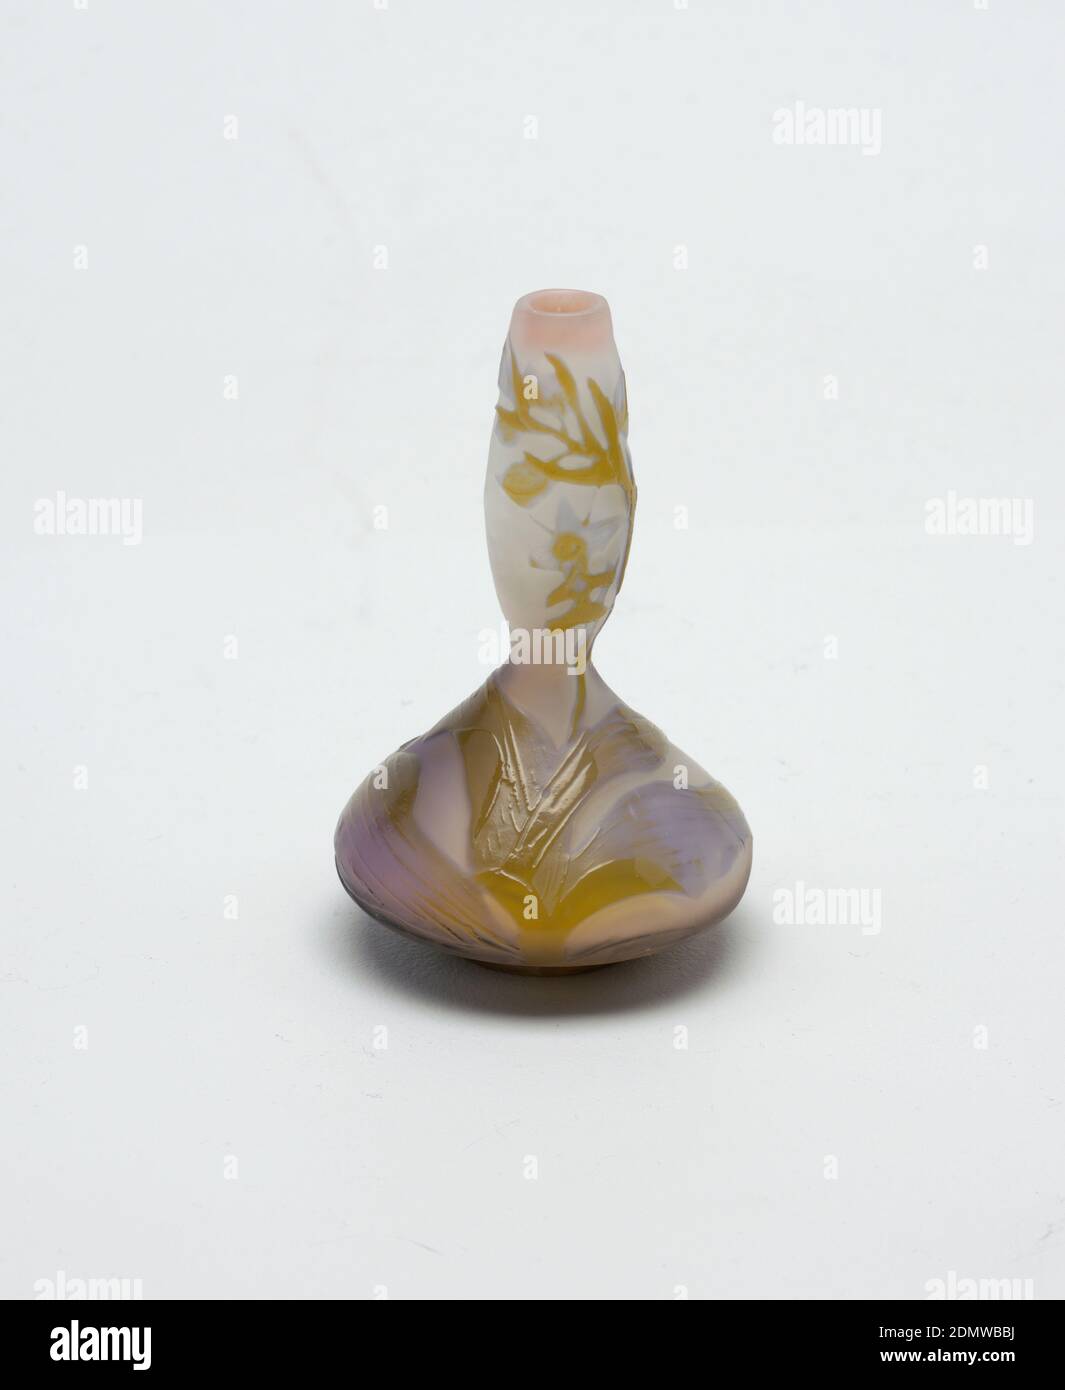 lavender, Gallé, Emile Gallé, French, 1846 - 1904, Glass, Vase with bulbous body, elongated swollen neck; decorated with mustard yellow and lavender plants and flowers on white-gray background., France, late 19th–early 20th century, glasswares, Decorative Arts, Vase, Vase Stock Photo